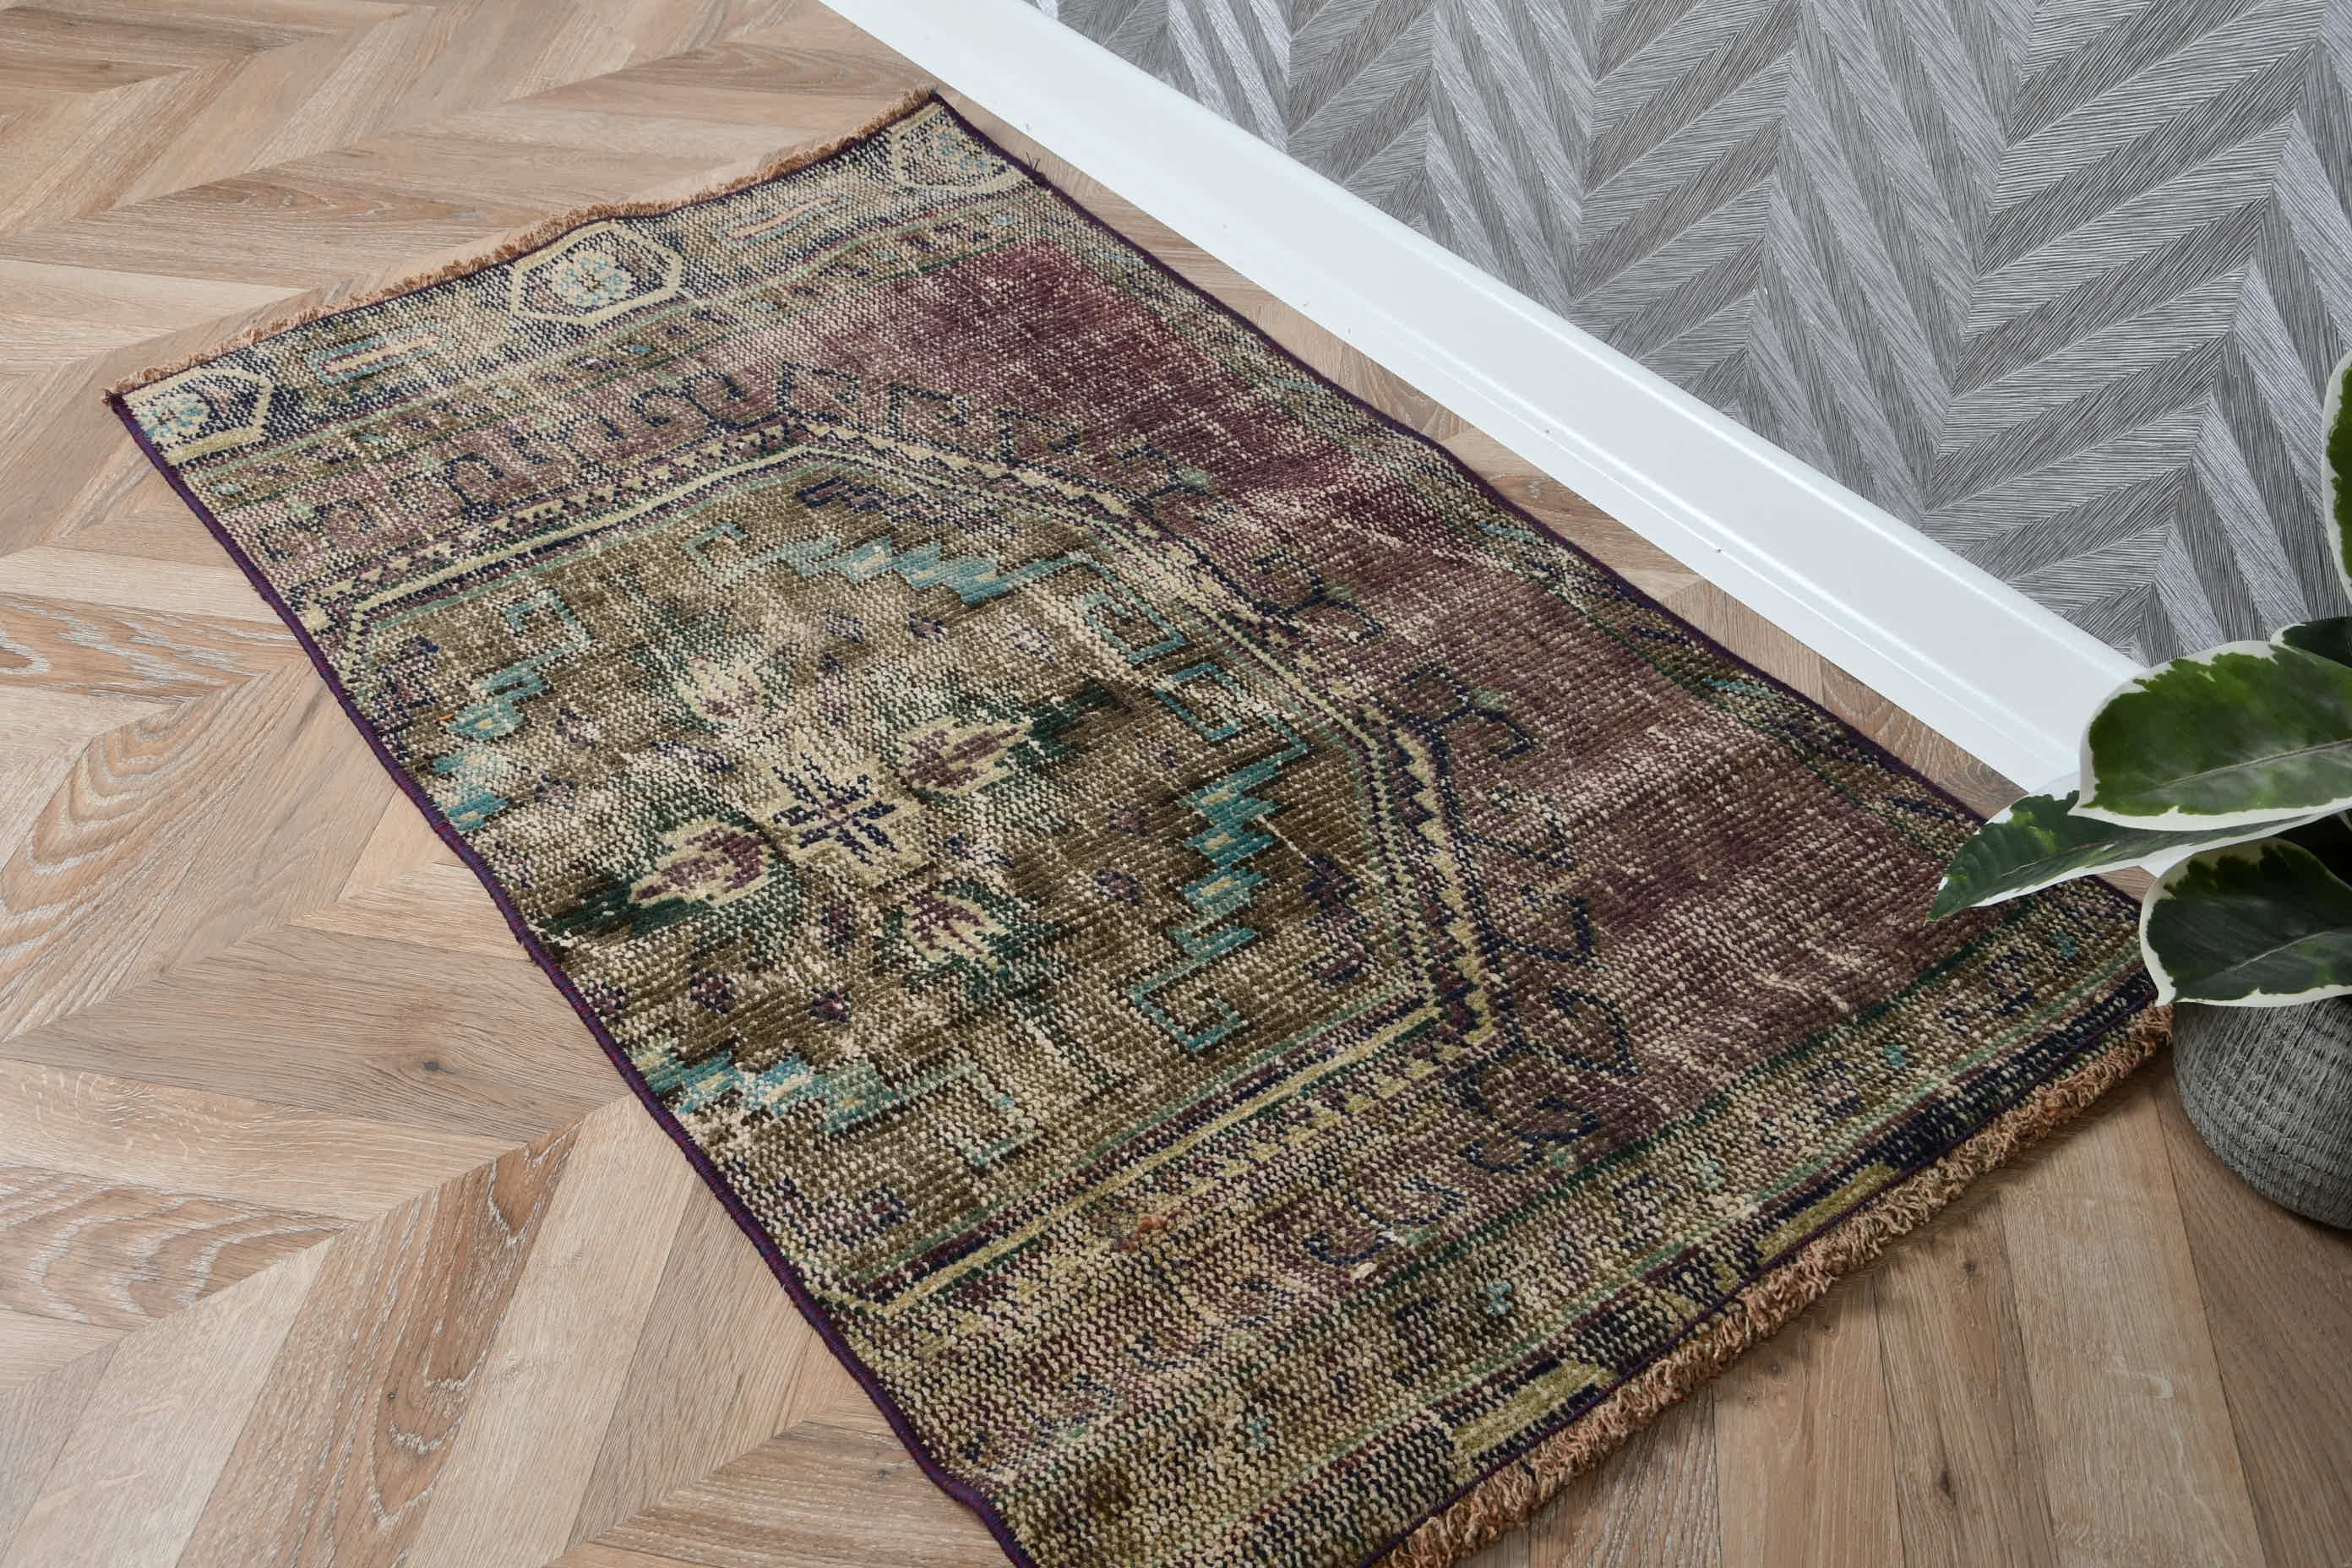 Wool Rug, Rugs for Car Mat, Turkish Rug, Bath Rugs, Antique Rug, 2x3.5 ft Small Rugs, Purple Home Decor Rug, Entry Rugs, Vintage Rug